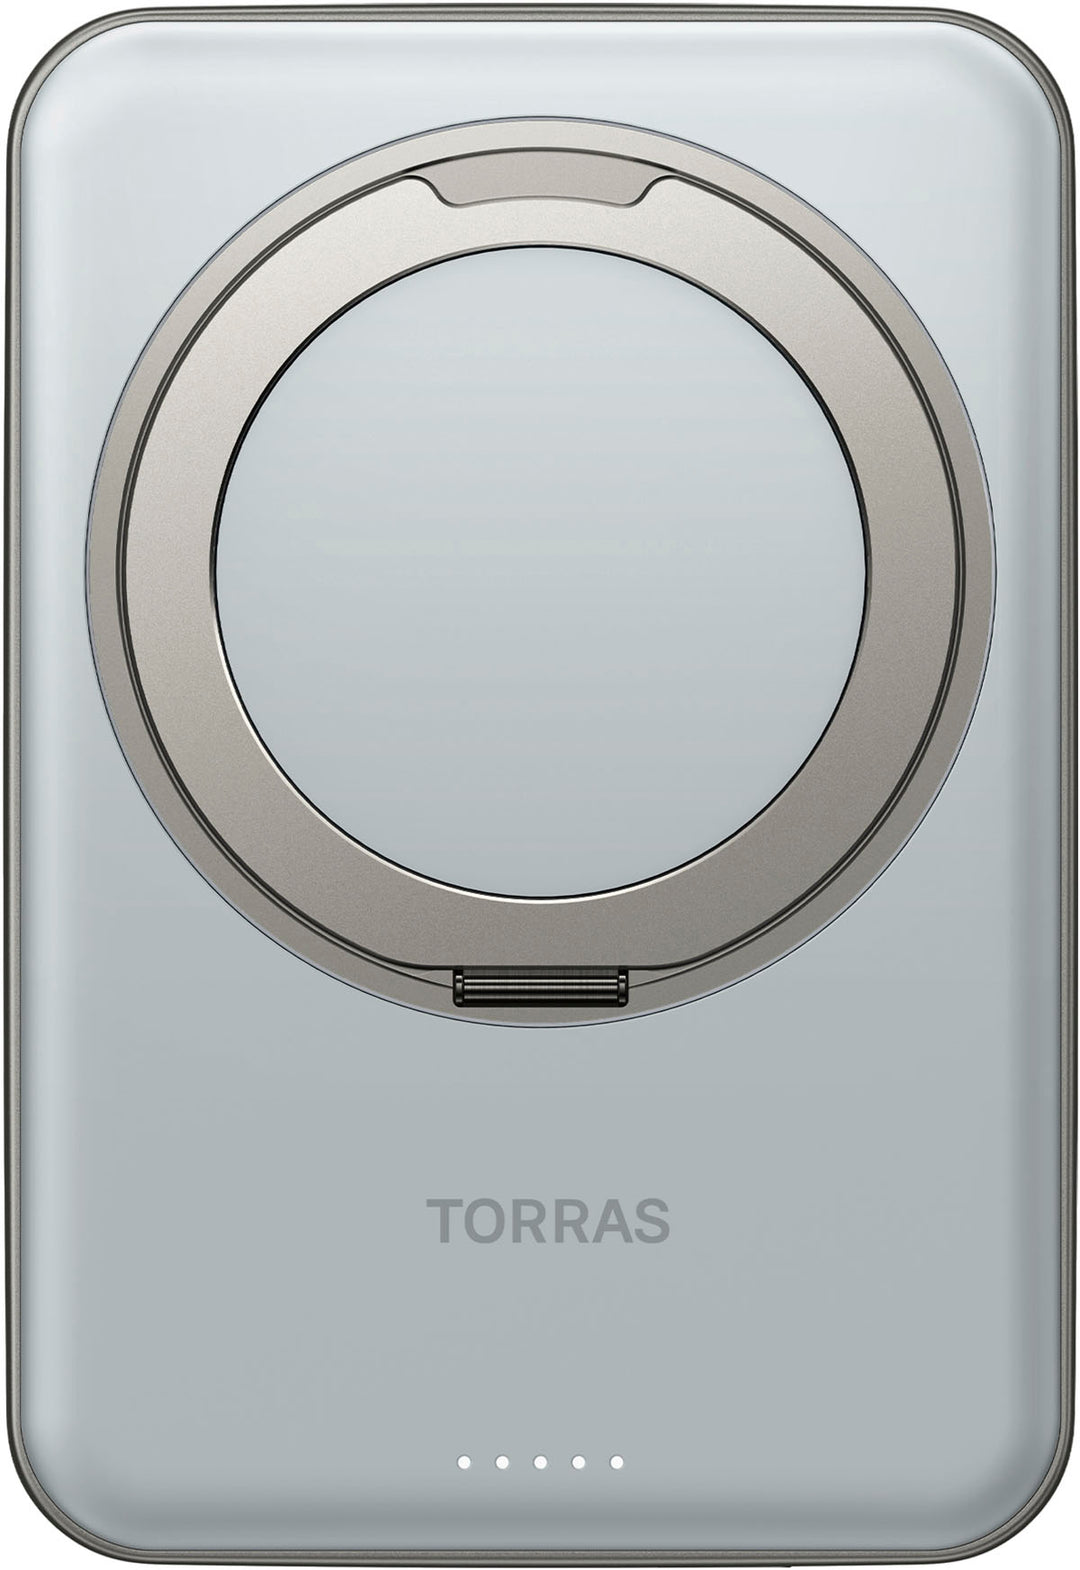 TORRAS - Ostand Magnetic Power Bank 5000mAh with 360° Rotatable Stand - Titanium Gray_6